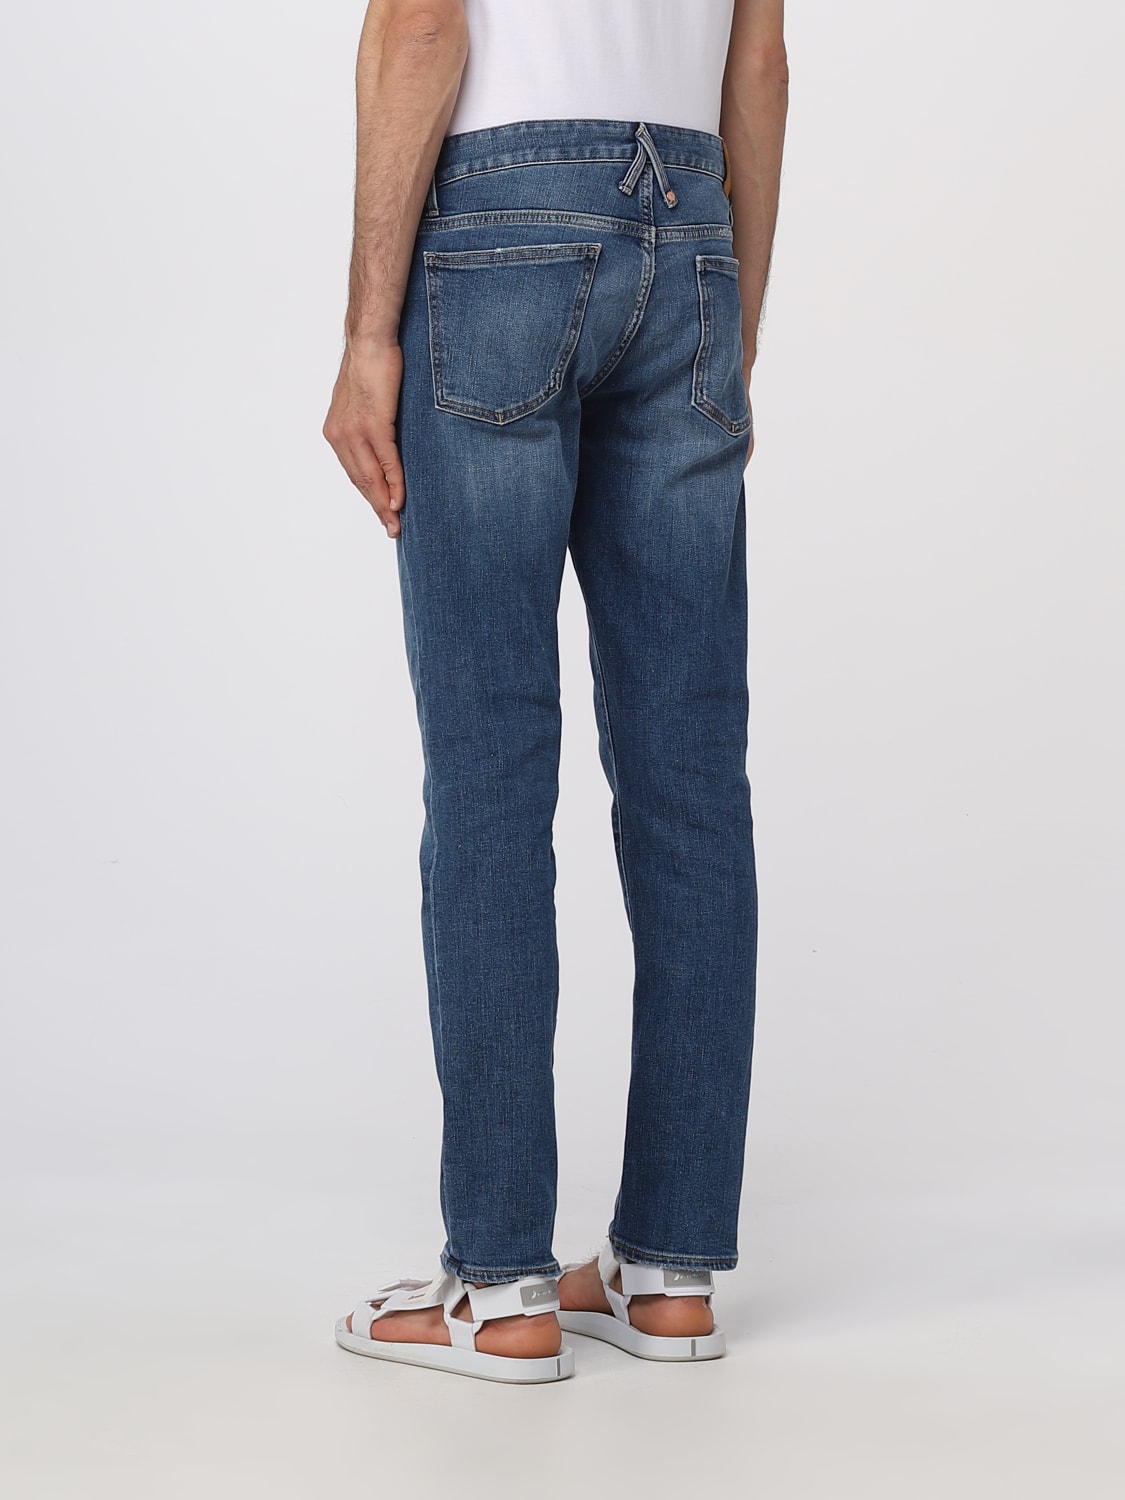 CYCLE: jeans for man - Denim | Cycle jeans CC321P511D004 online on ...